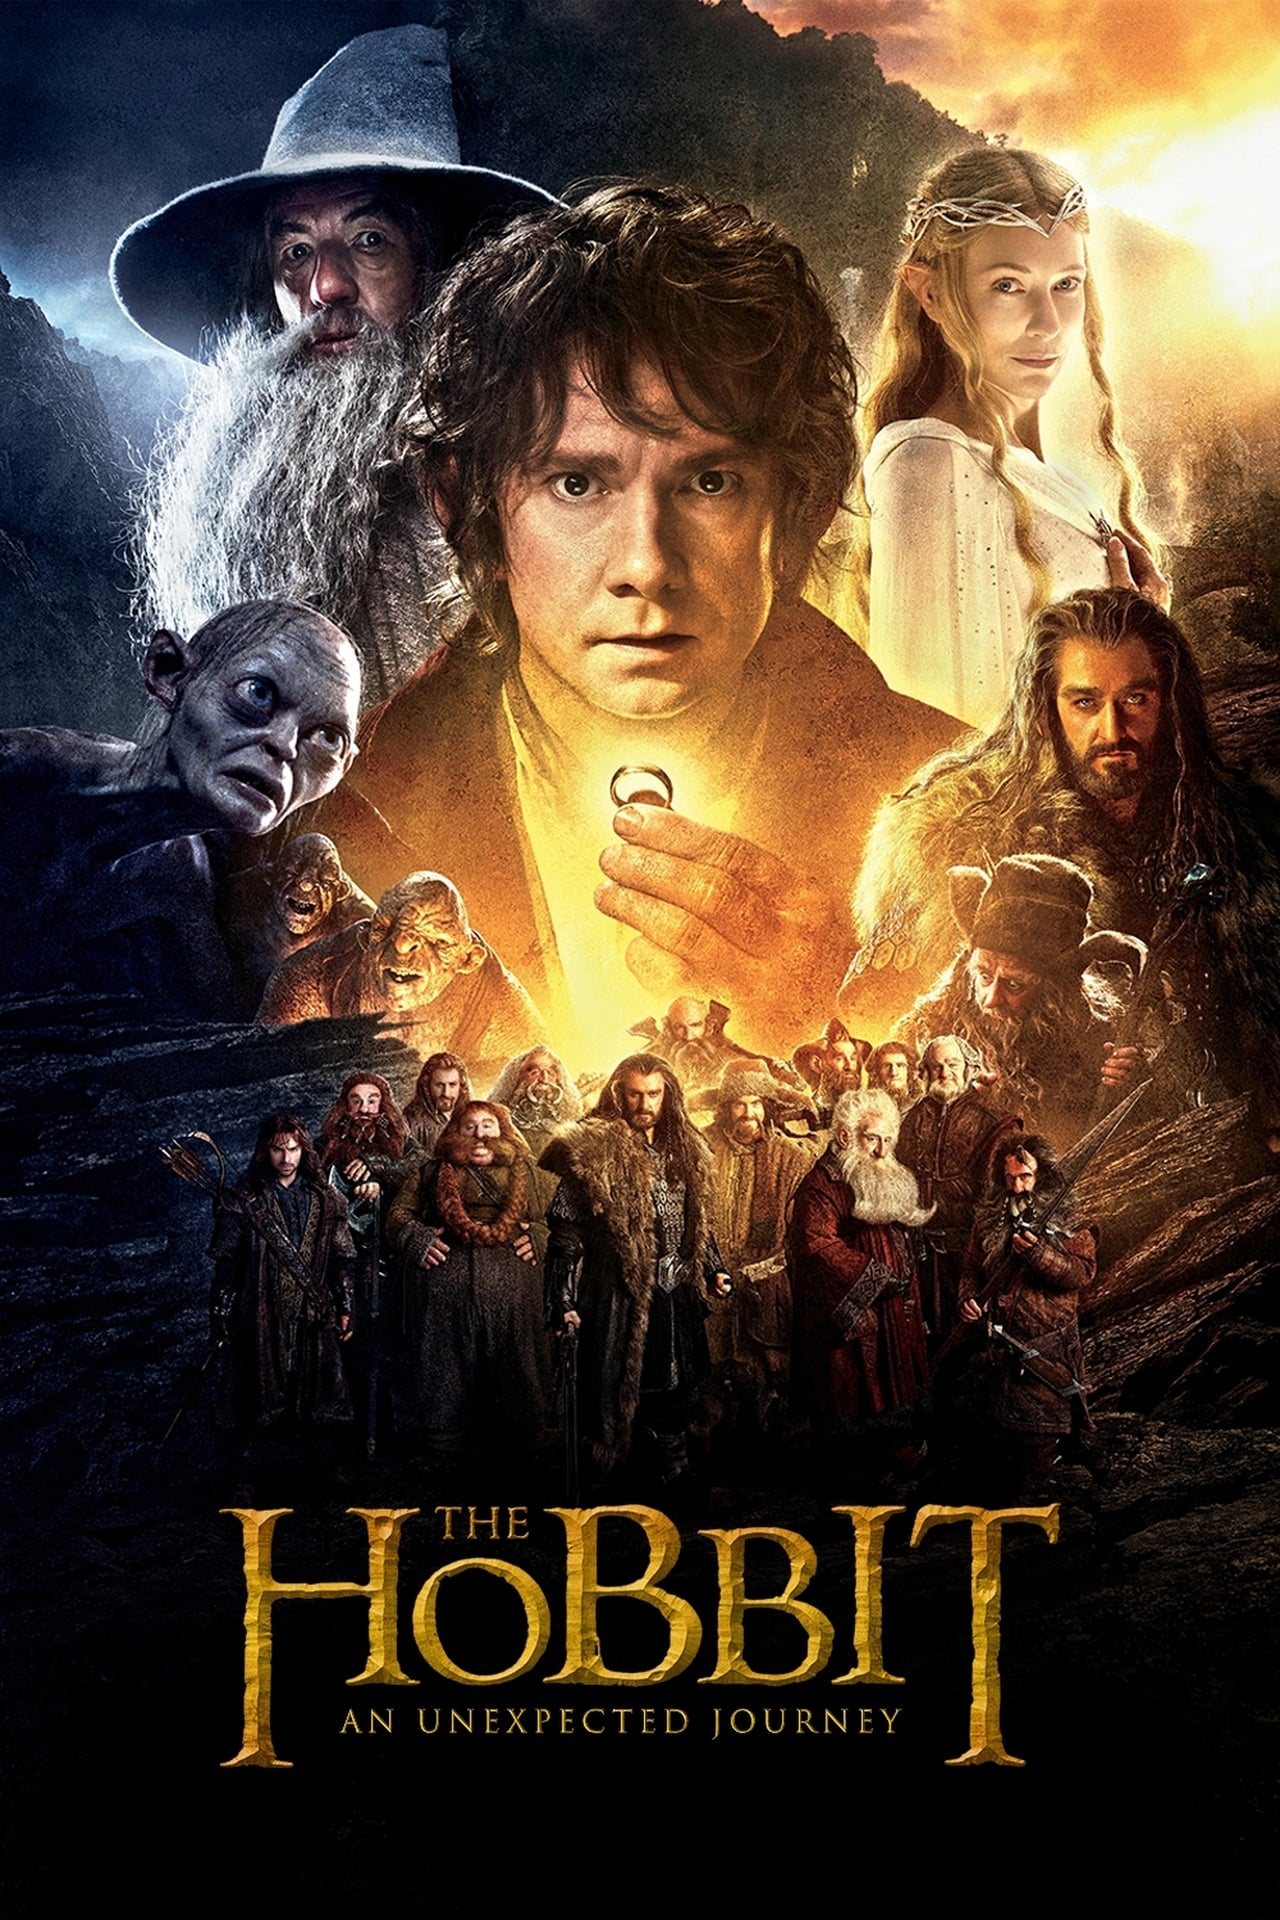 The Hobbit: An Unexpected Journey (2012) Theatrical Cut 768Kbps 23.976Fps 48Khz 5.1Ch BluRay Turkish Audio TAC